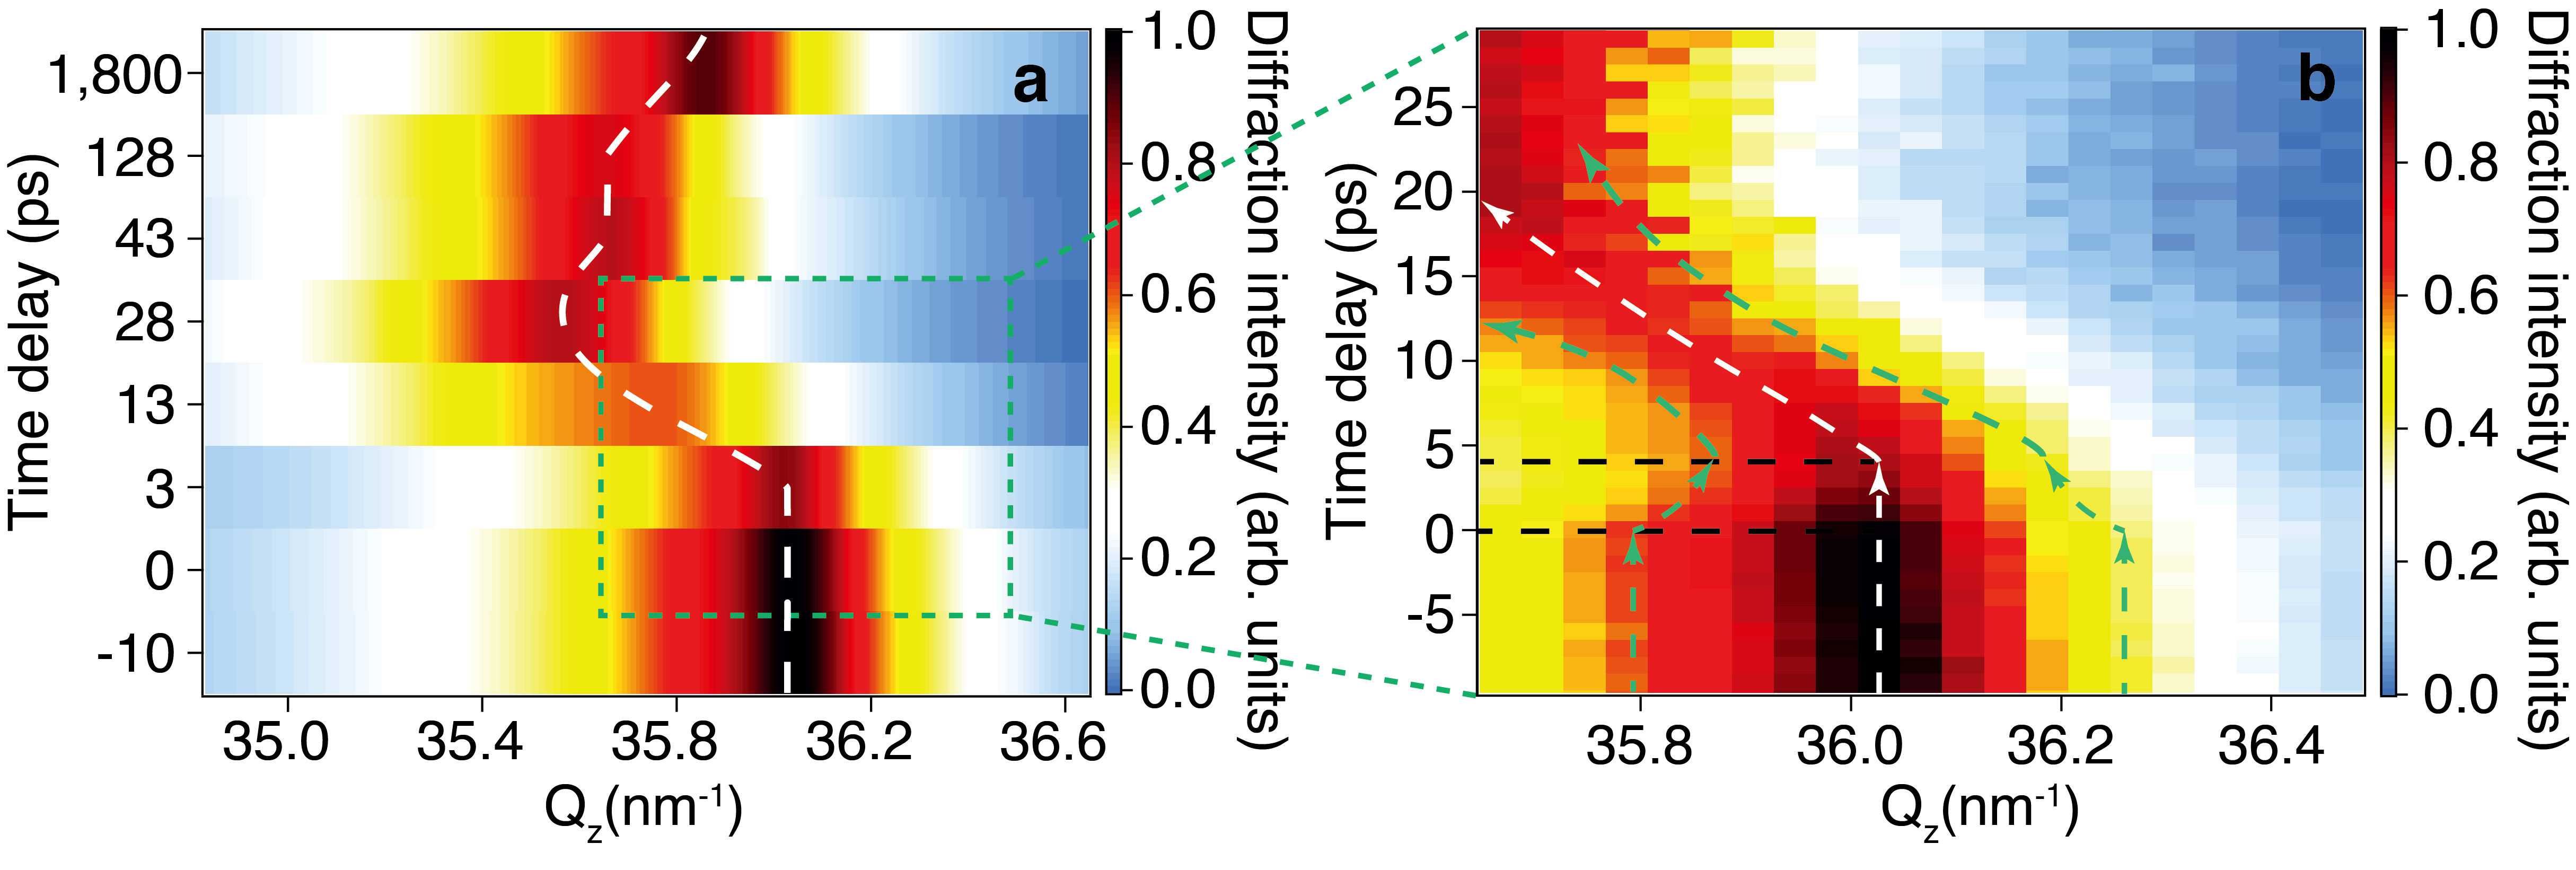 Time-resolved changes in (222) plane x-ray diffraction signal